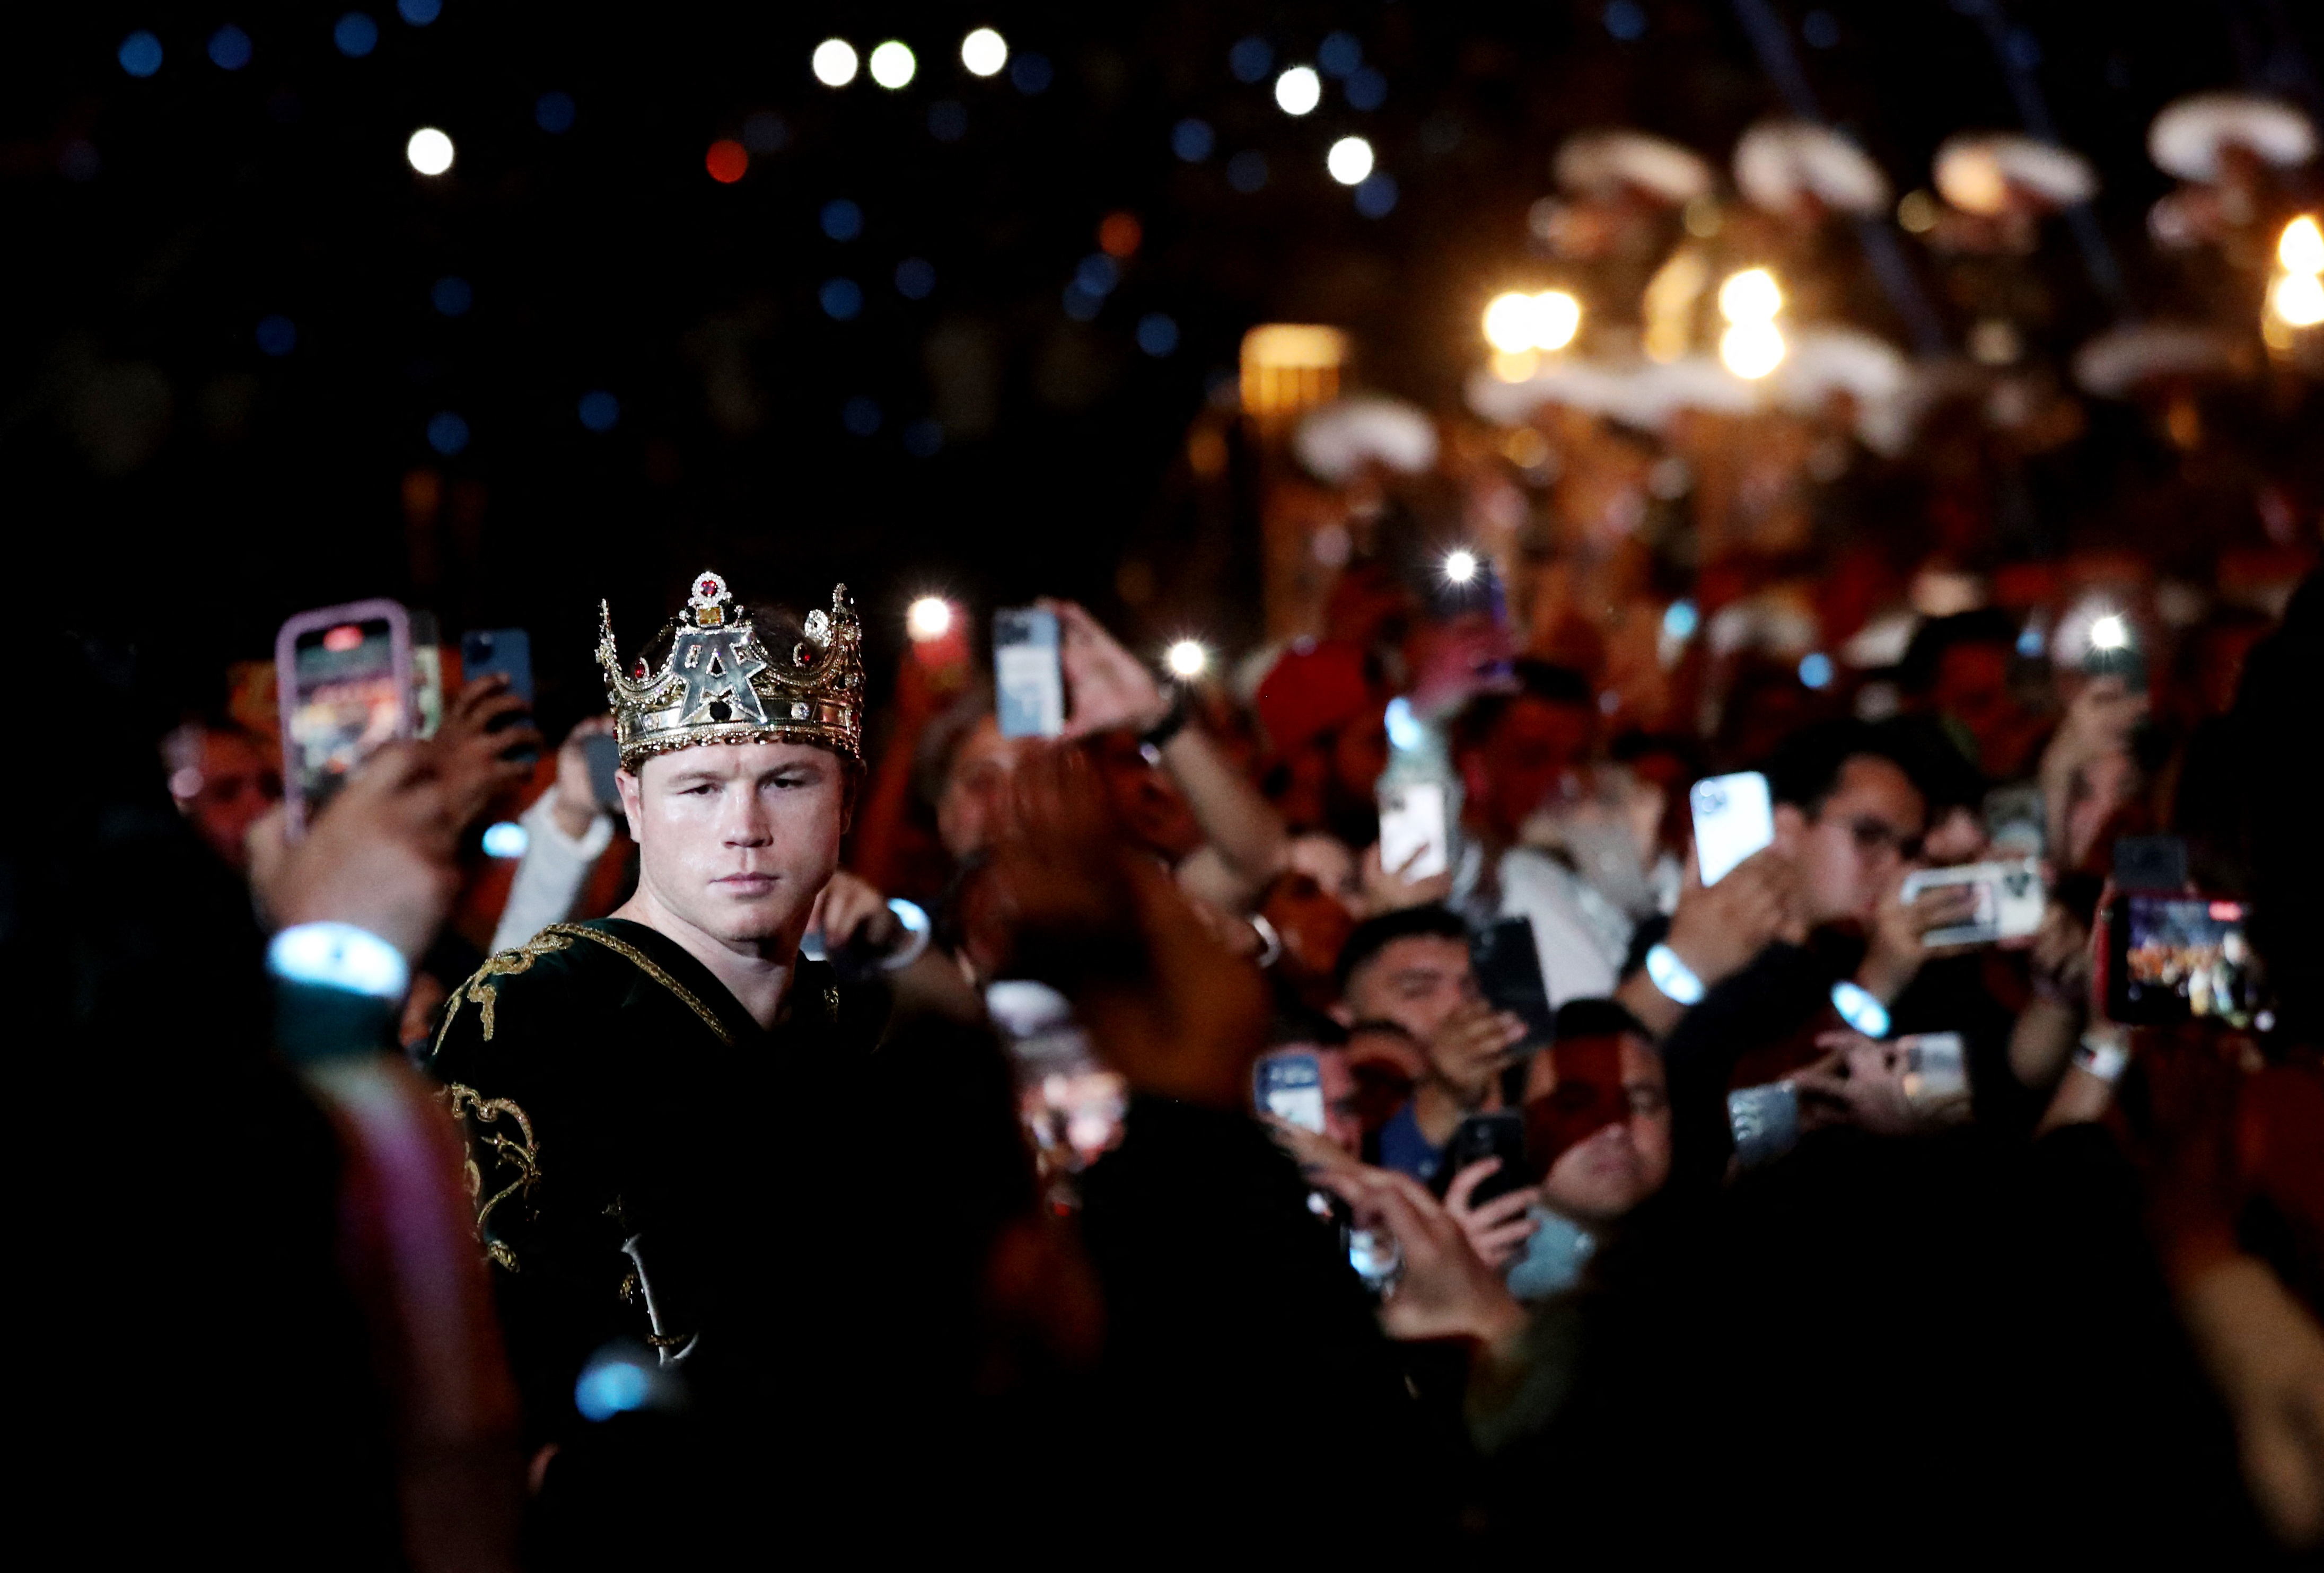 Saul 'Canelo' Alvarez dominates brave John Ryder and retains undisputed  super-middleweight crown in Mexican homecoming